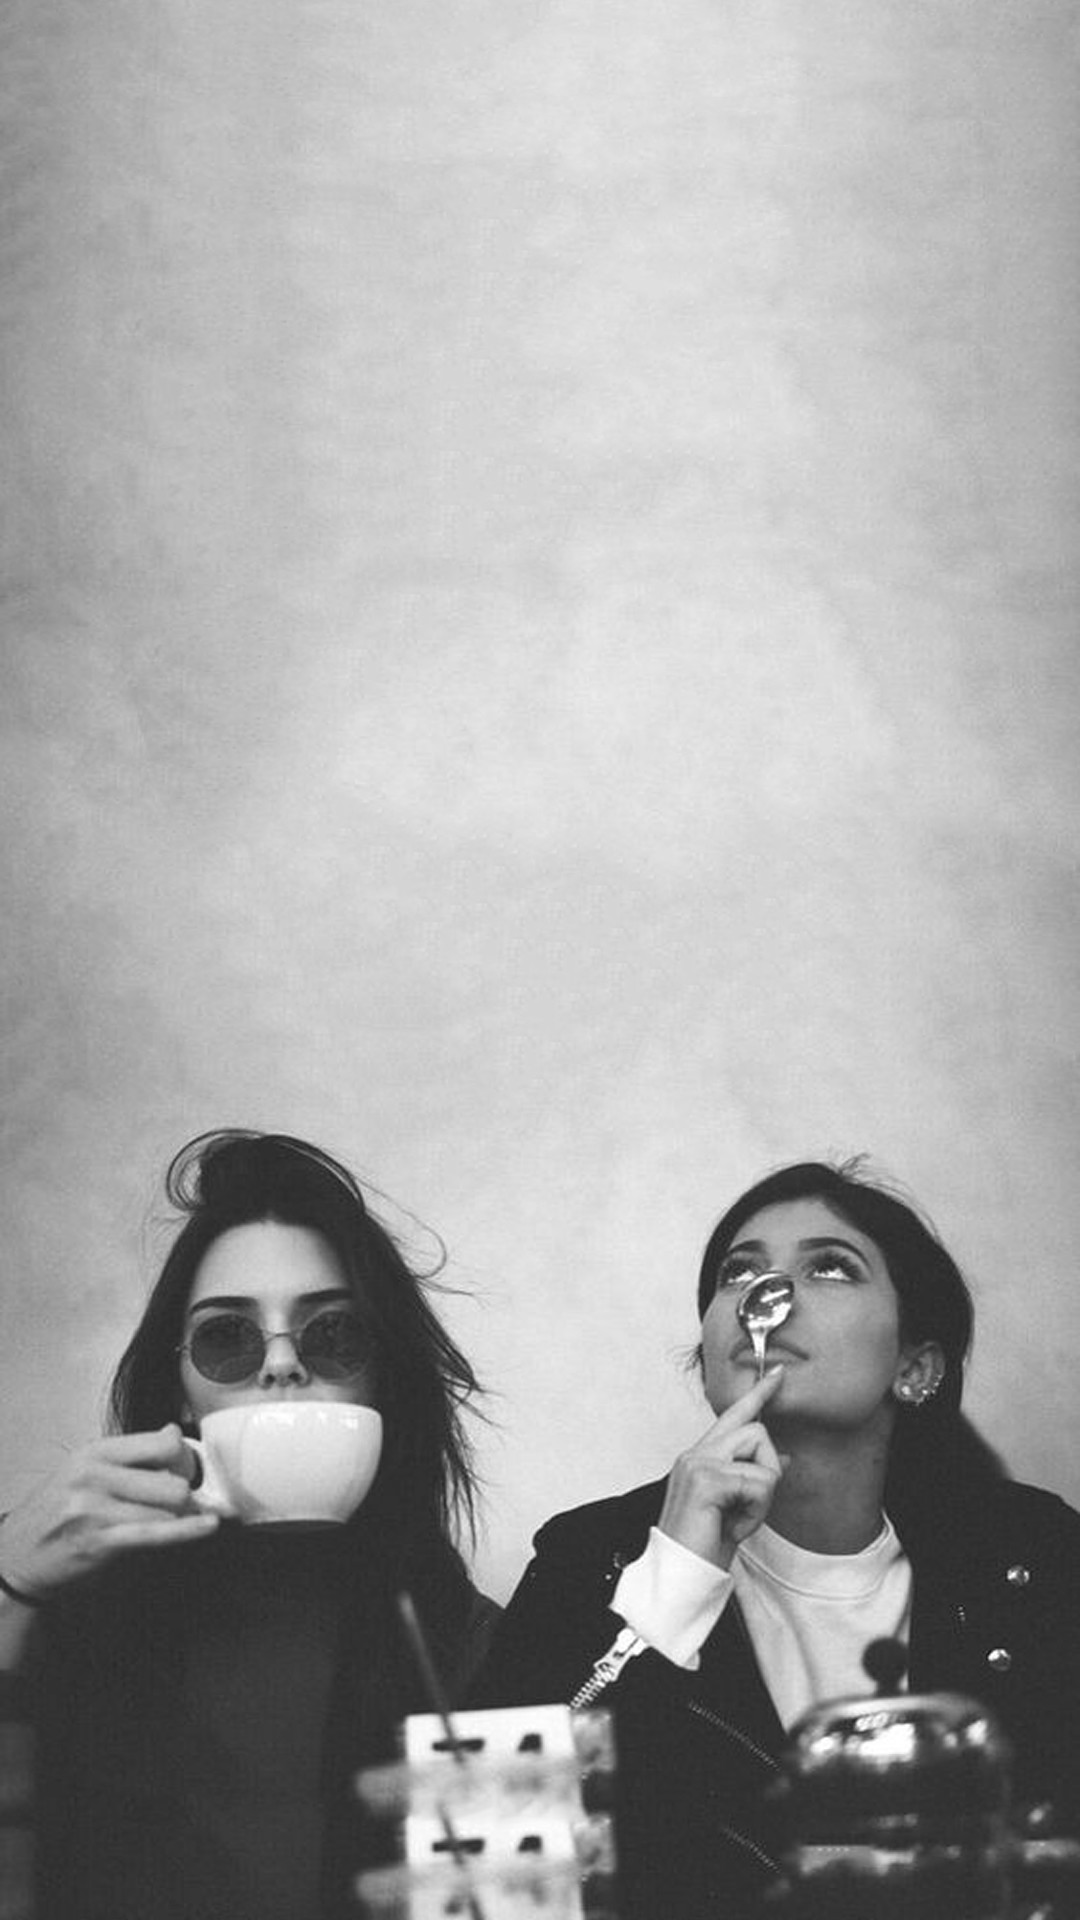 1080x1920 Kendall & Kylie Jenner iPhone 6/6s/7 black and white wallpaper lockscreen.